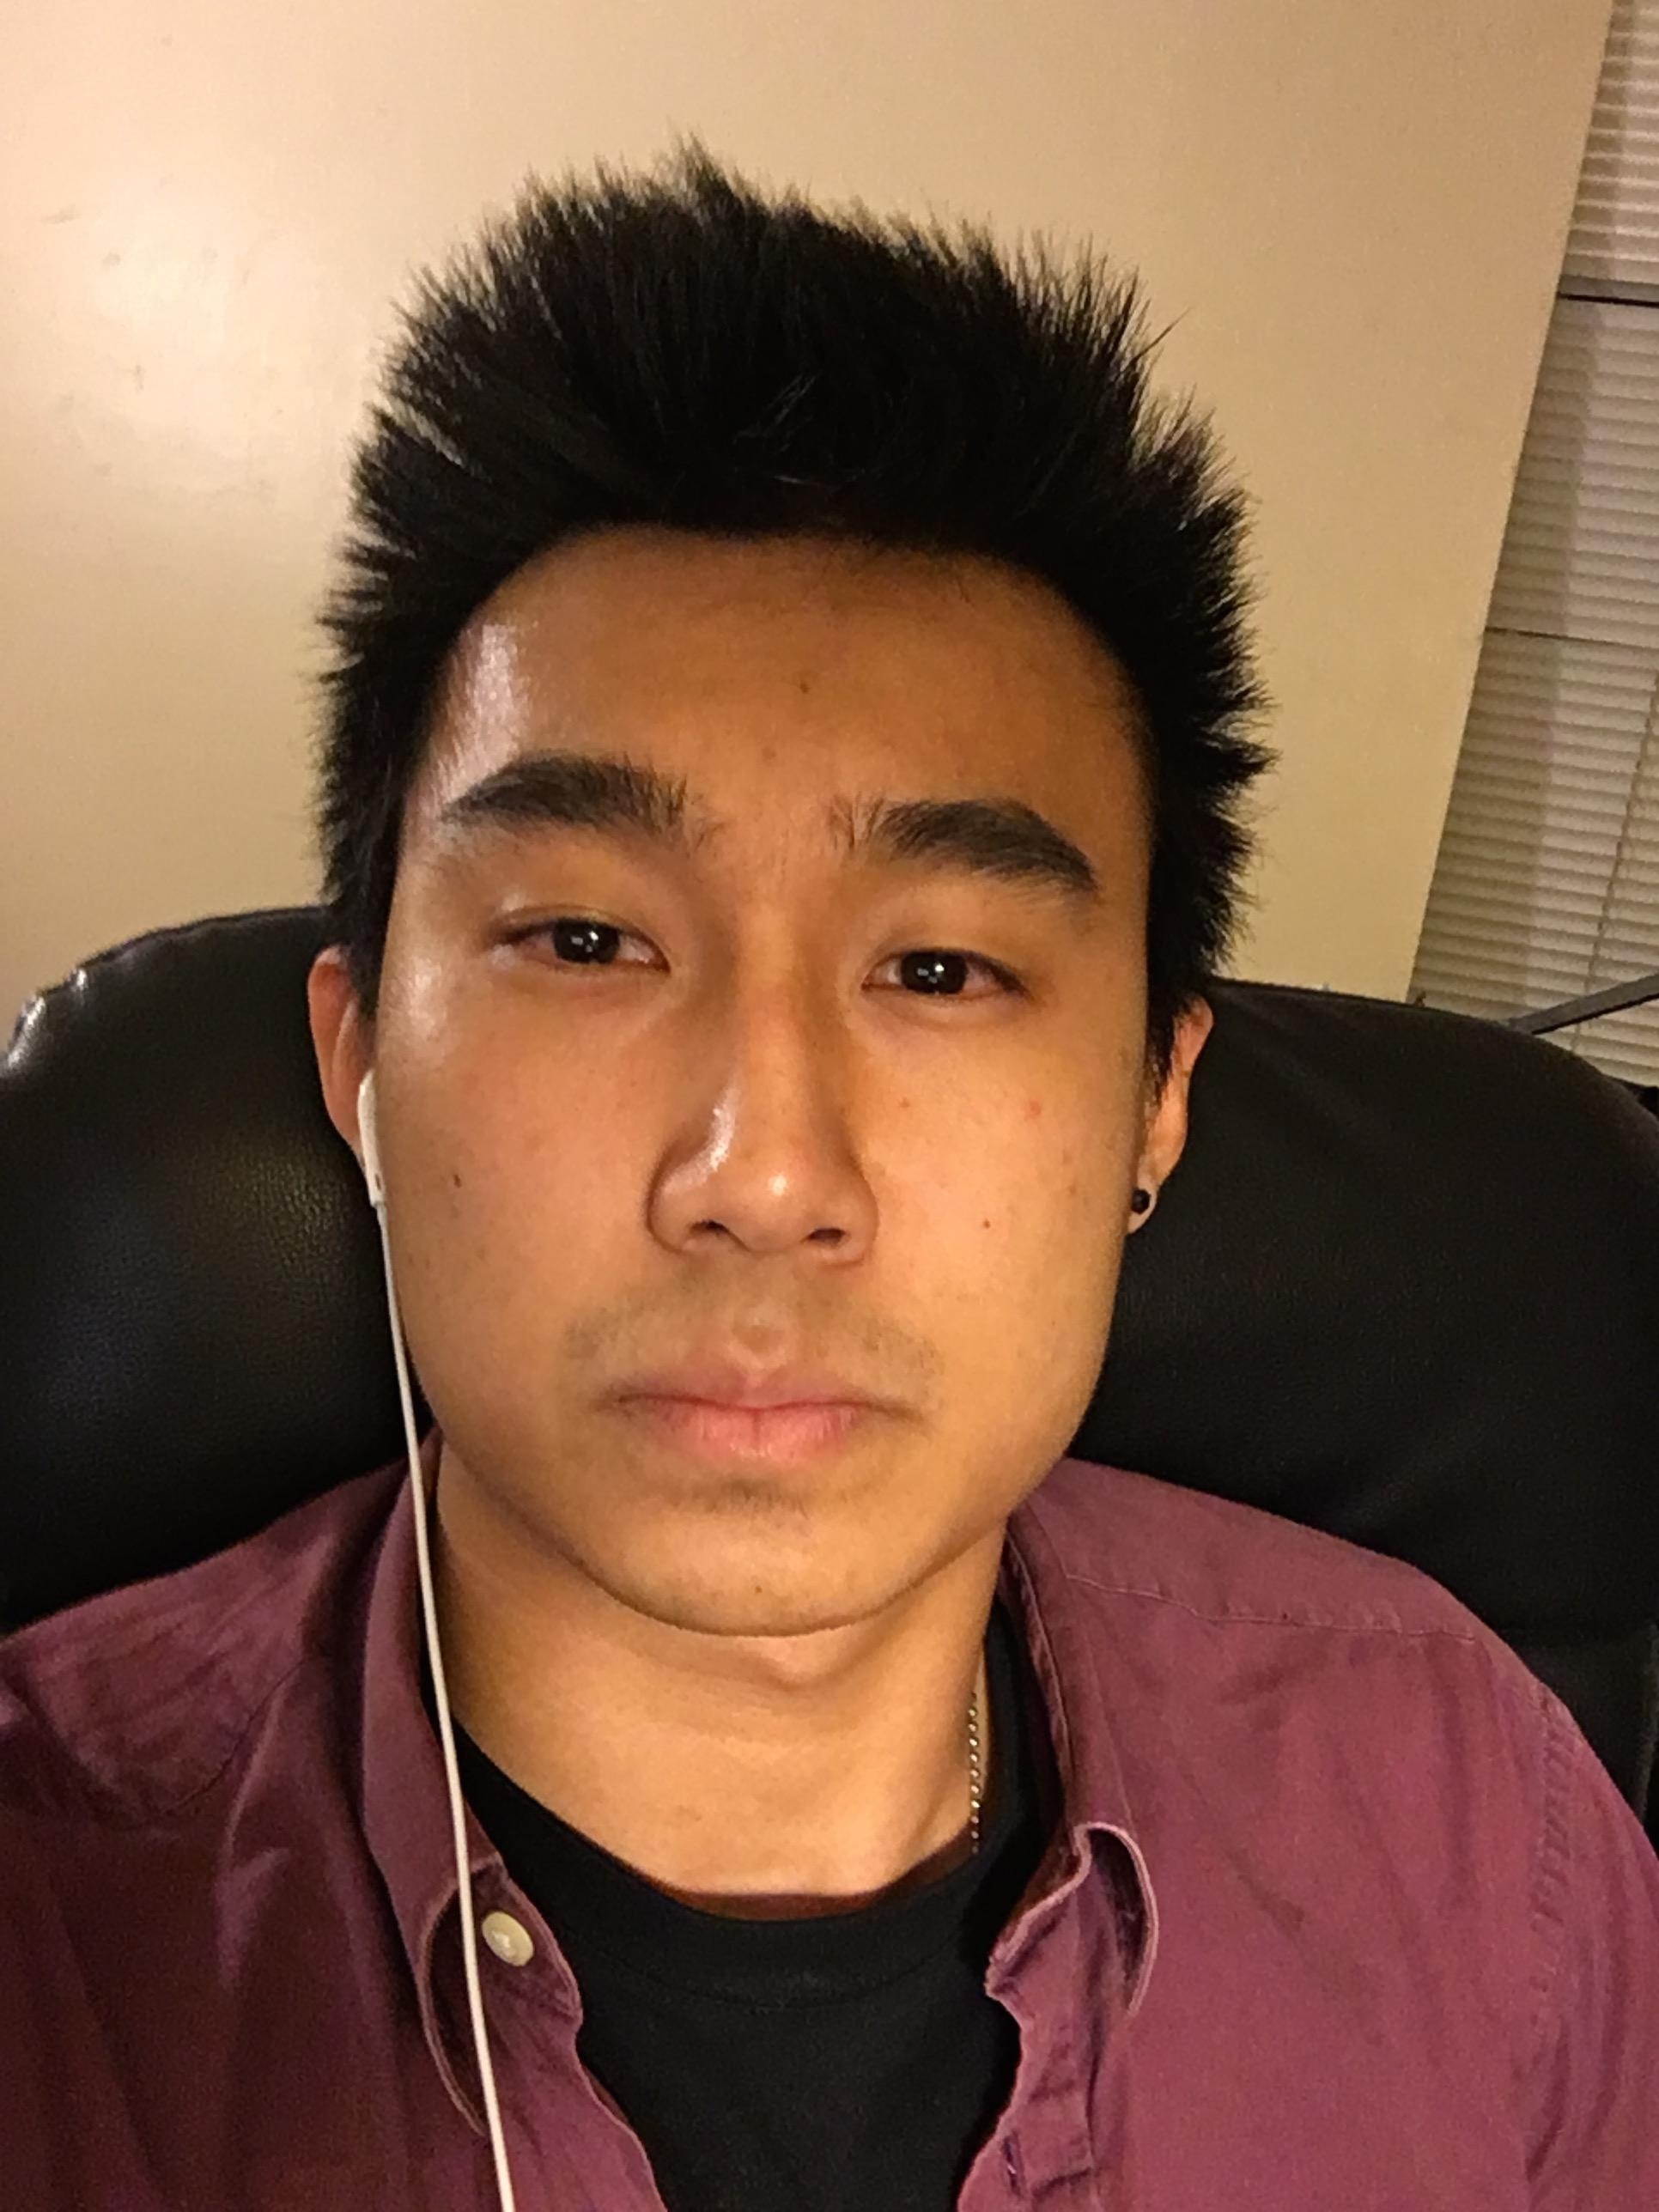 Asian Boy Needs New Hair Style That&amp;#039;s Not High Maintenance. Thanks with Best Asian Male Hairstyles Reddit